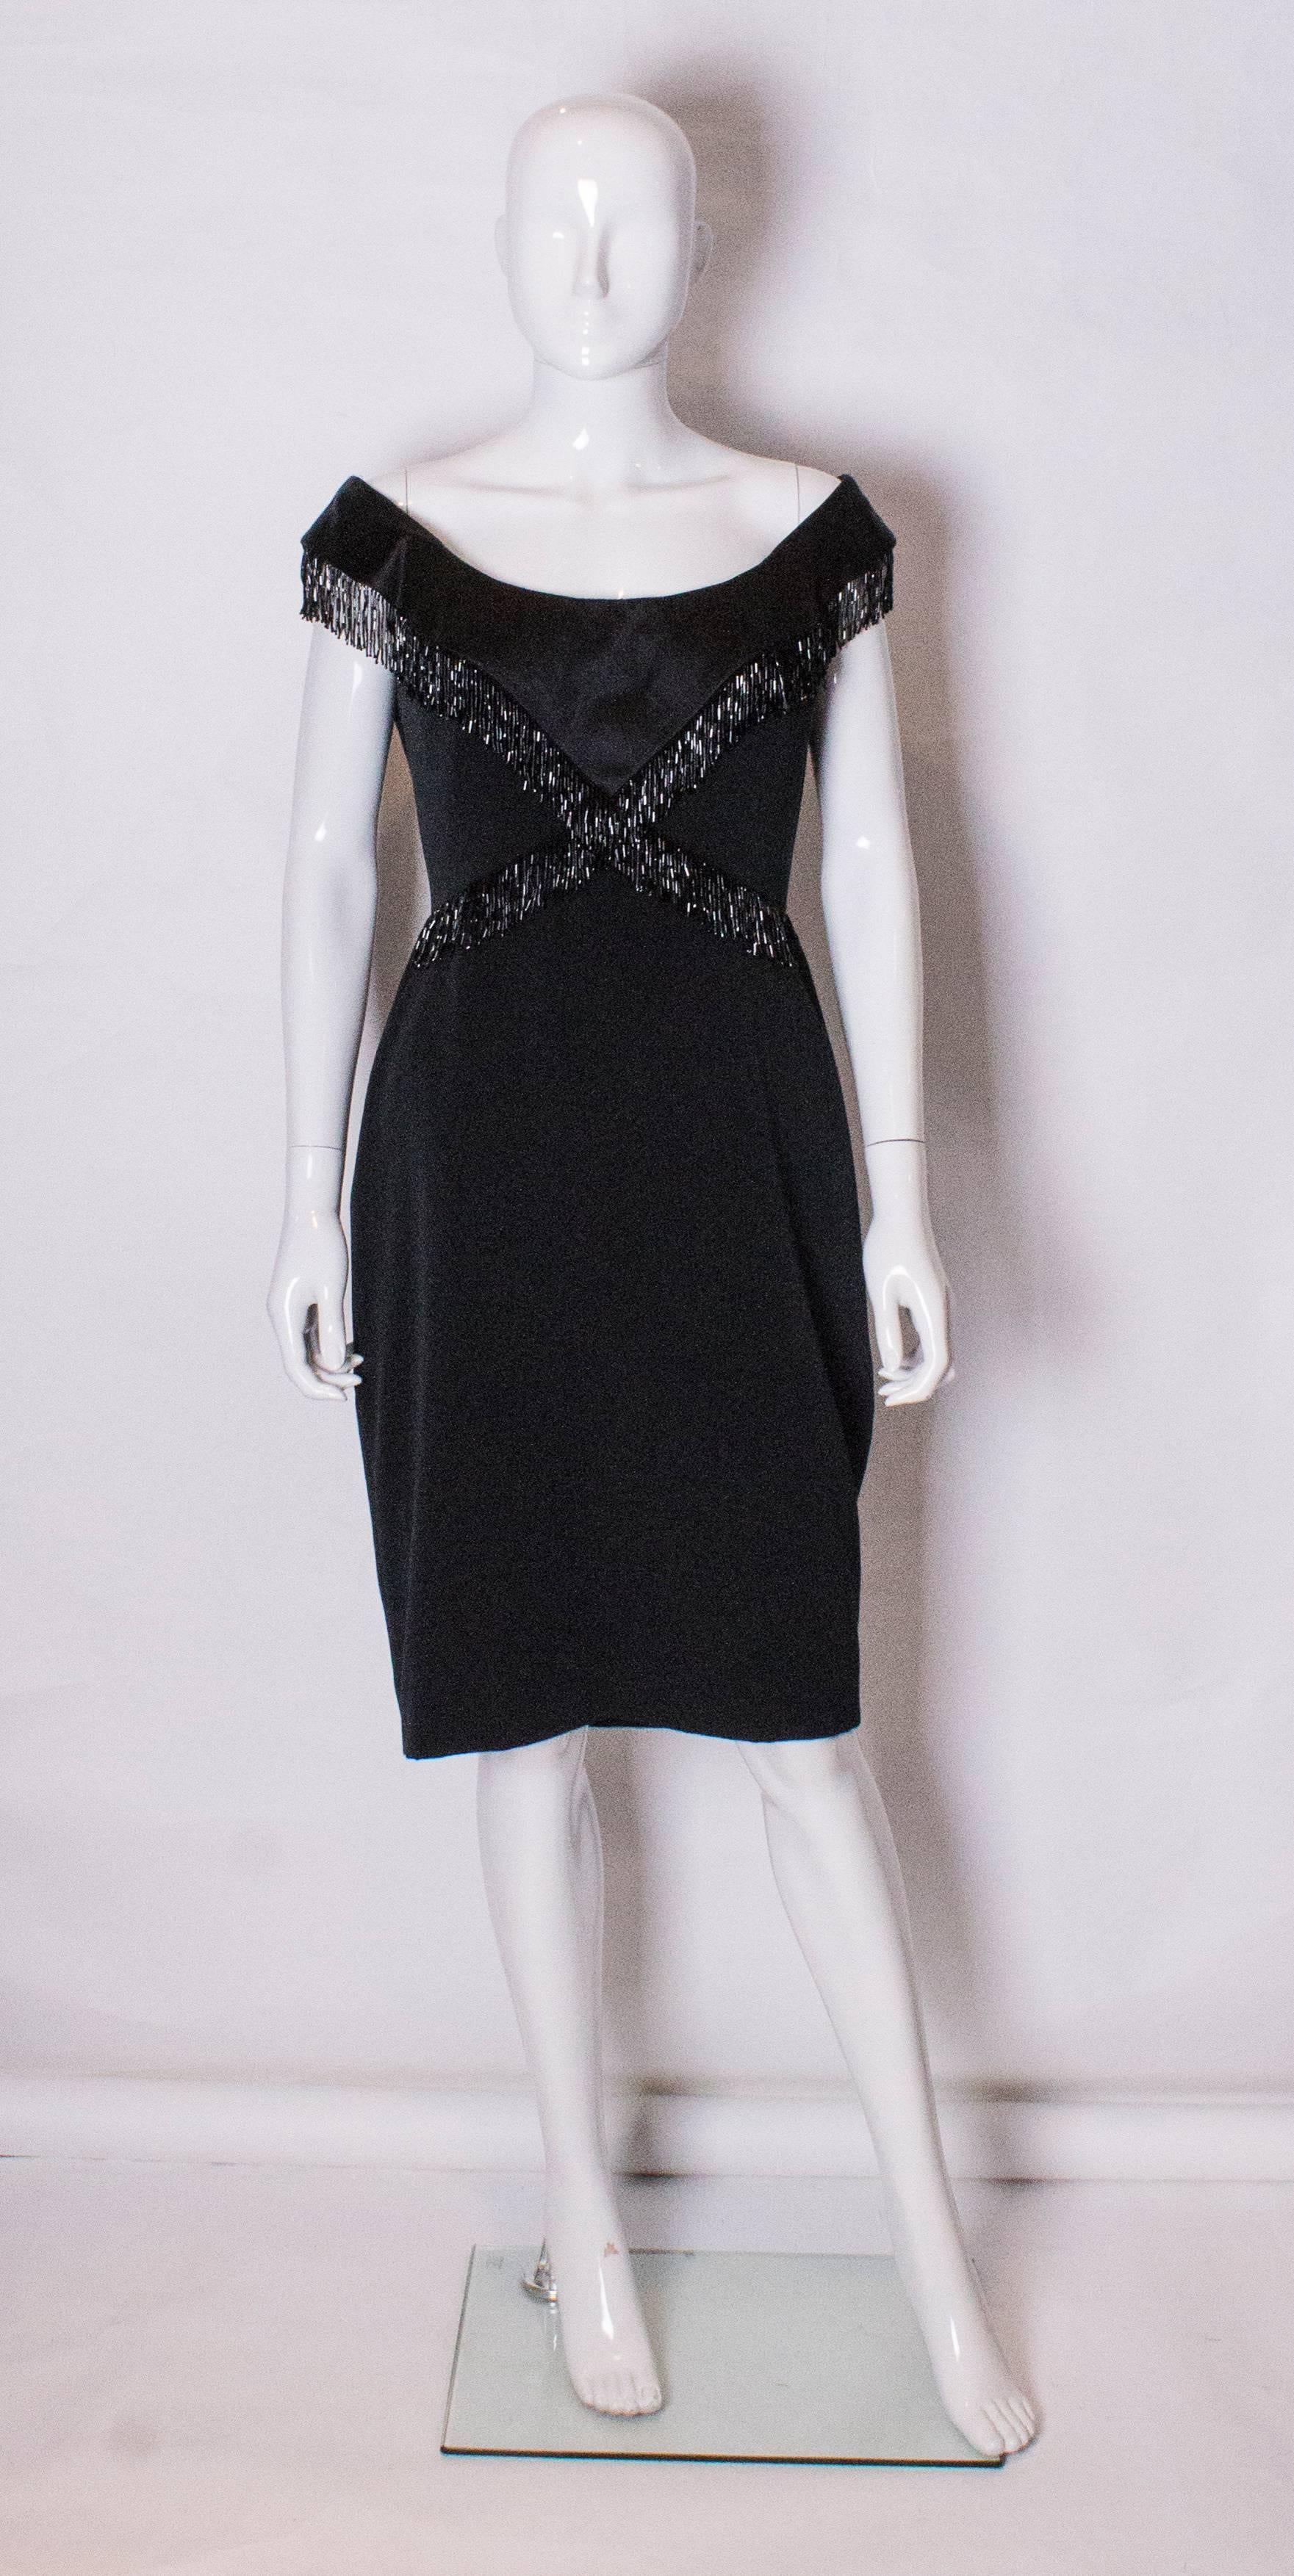 A chic vintage cocktail dress by Bellville Sassoon. The dress has a low boat neckline, and decorative beading across the bust and waist. The dress is fully lined and has a central back zip.